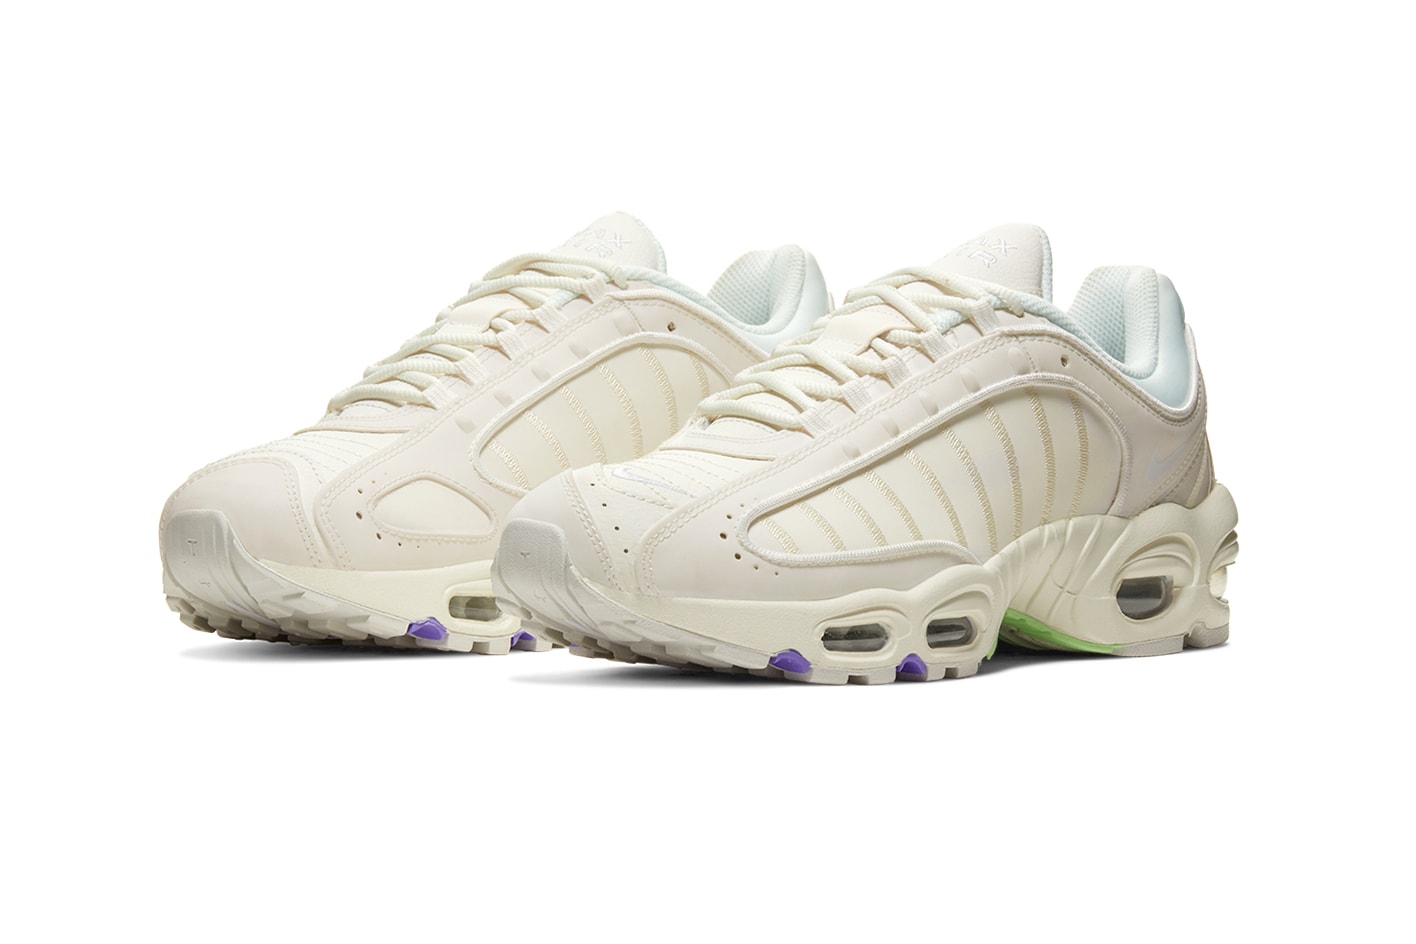 Nike Air Max Tailwind IV 99 Reflective SP Release  Cq6569-100 air max nike shoes kicks sneakers footwear SNS 